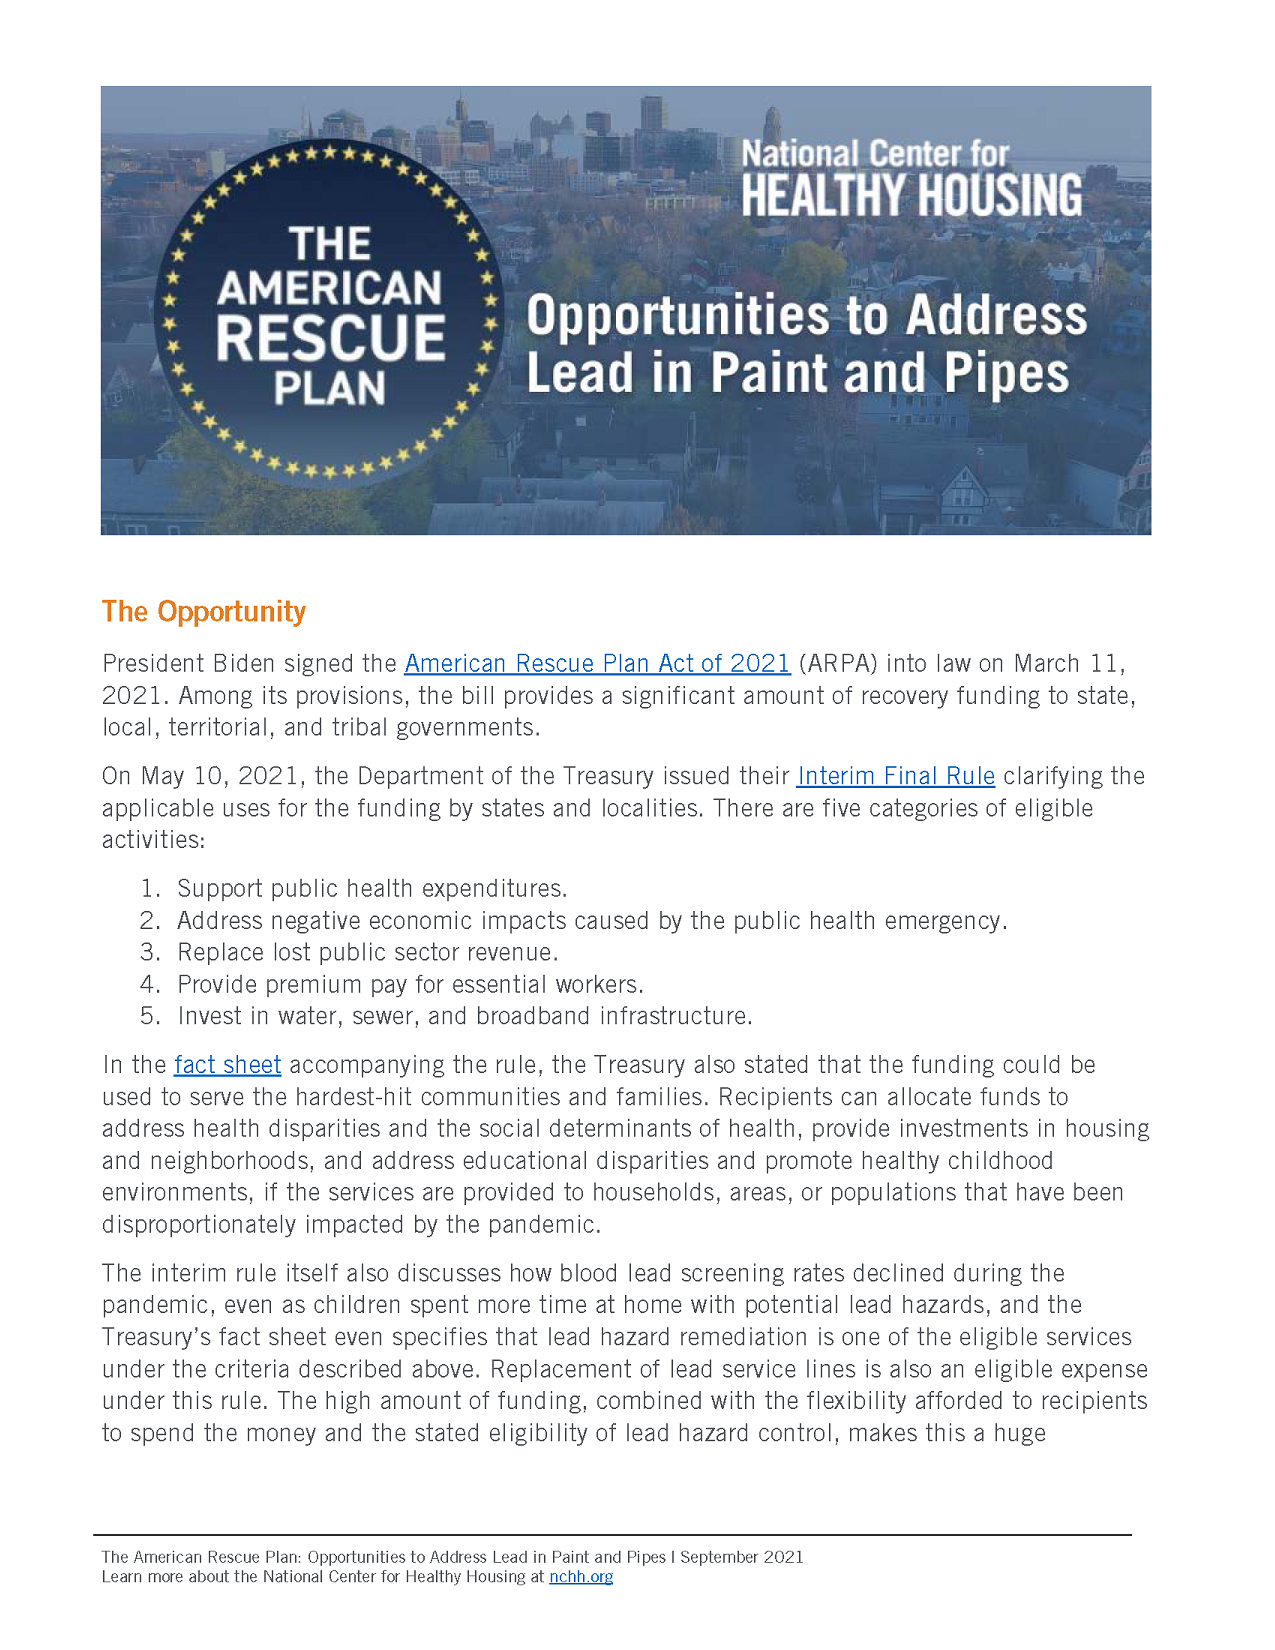 The American Rescue Plan: Opportunities to Address Lead in Paints and Pipes